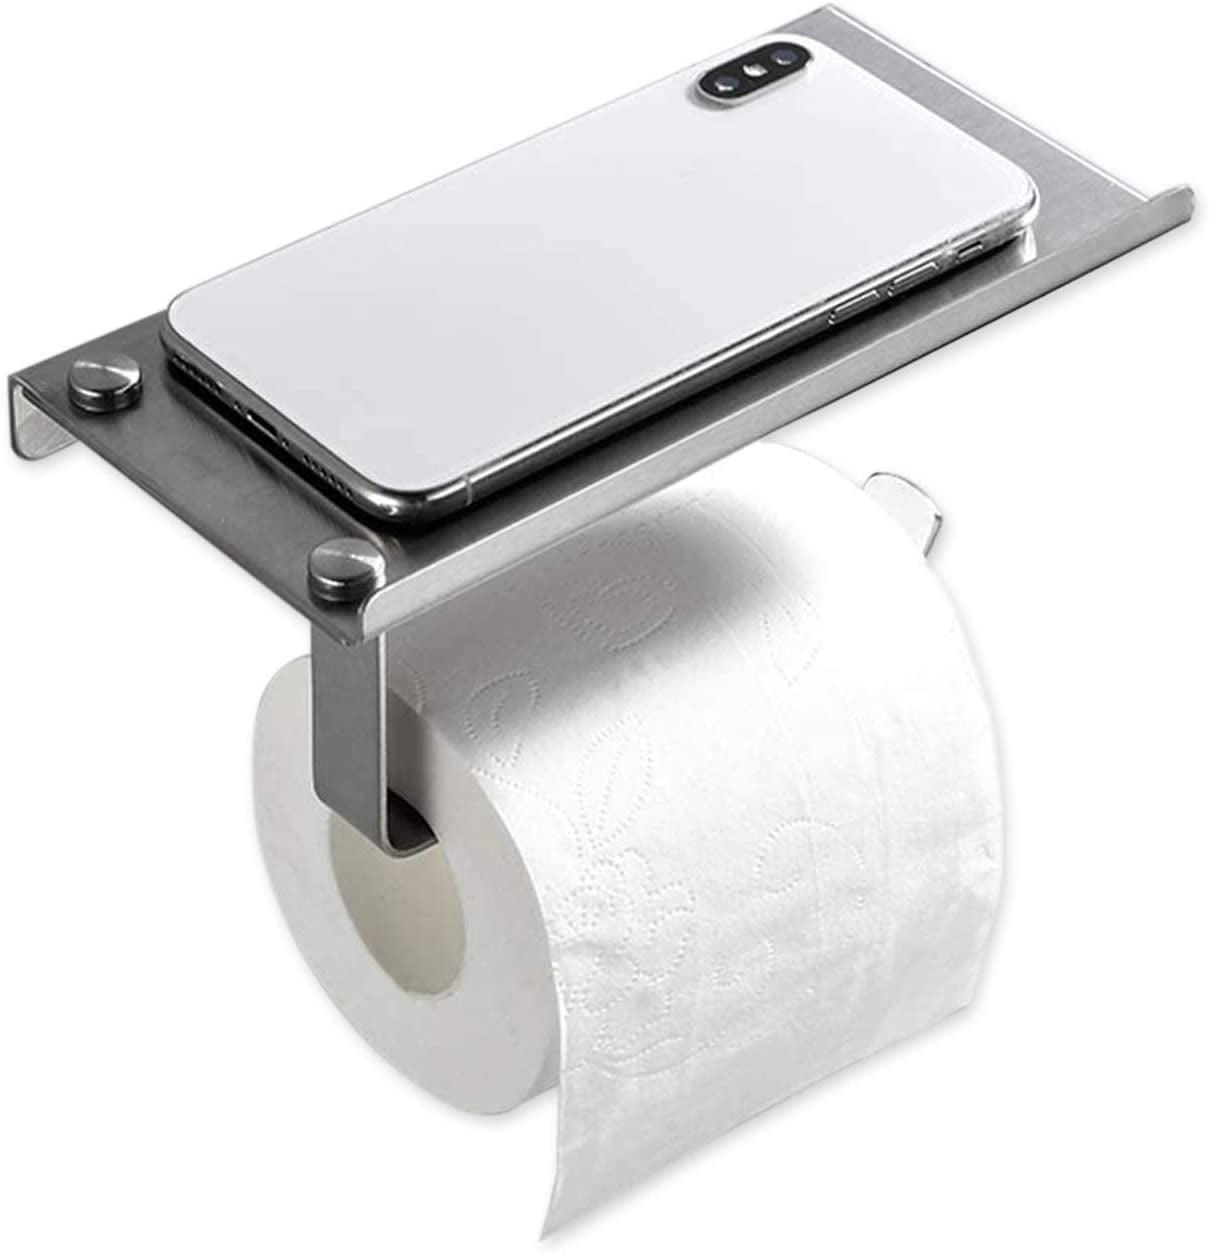 Details about   Stainless Steel Bathroom Paper Roll Holder Wall-Mounted Rack Toilet Attachme 